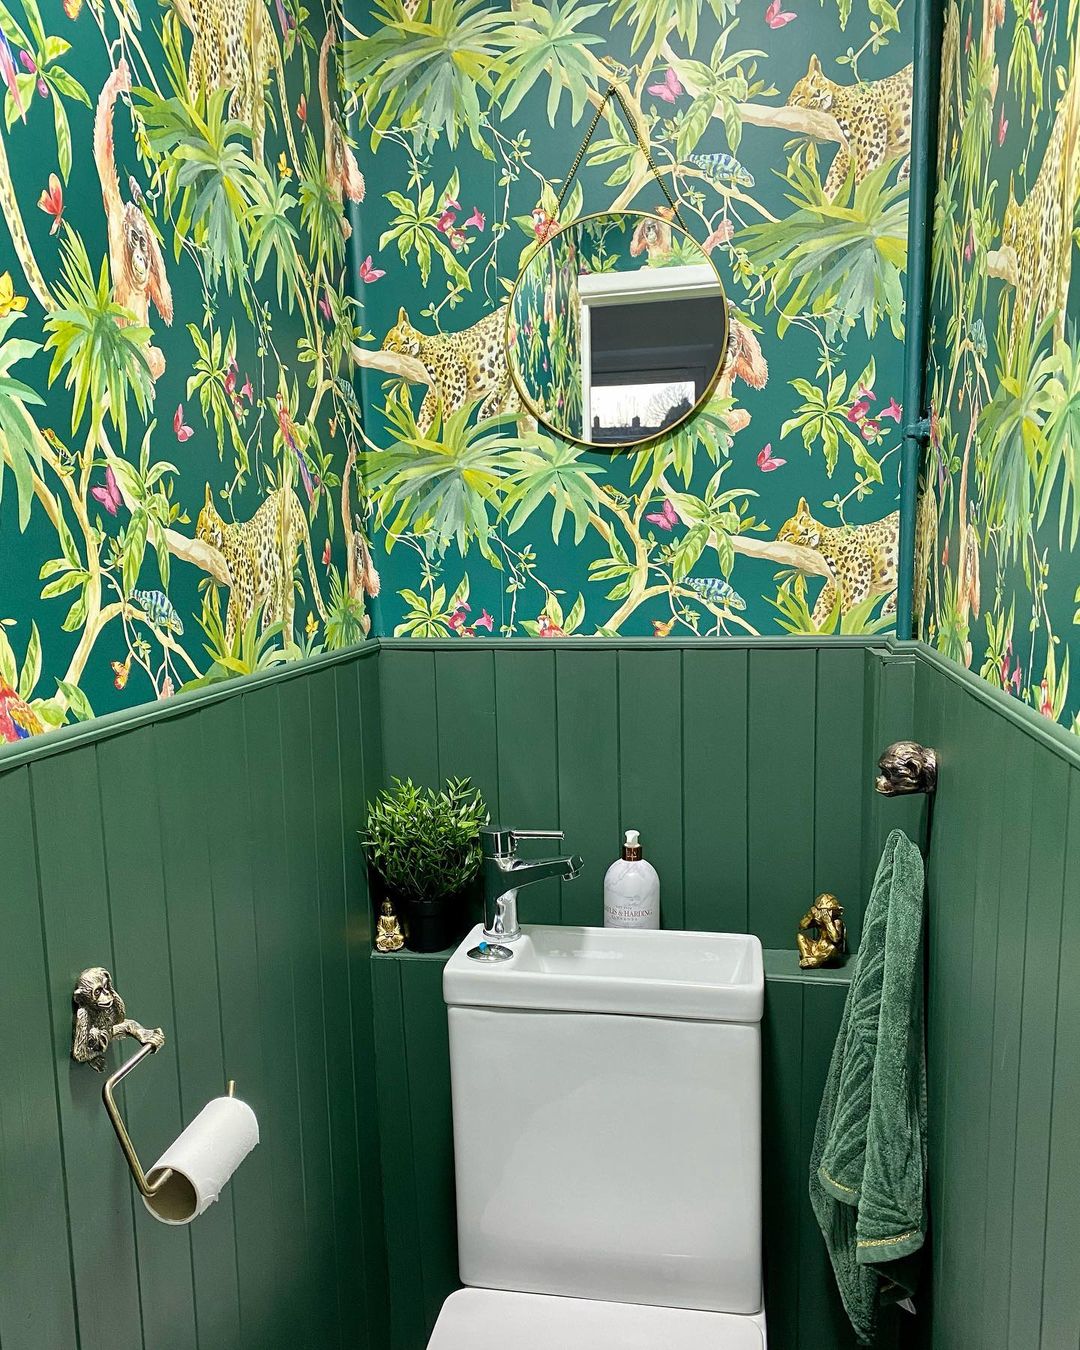 Go wild with wallpaper